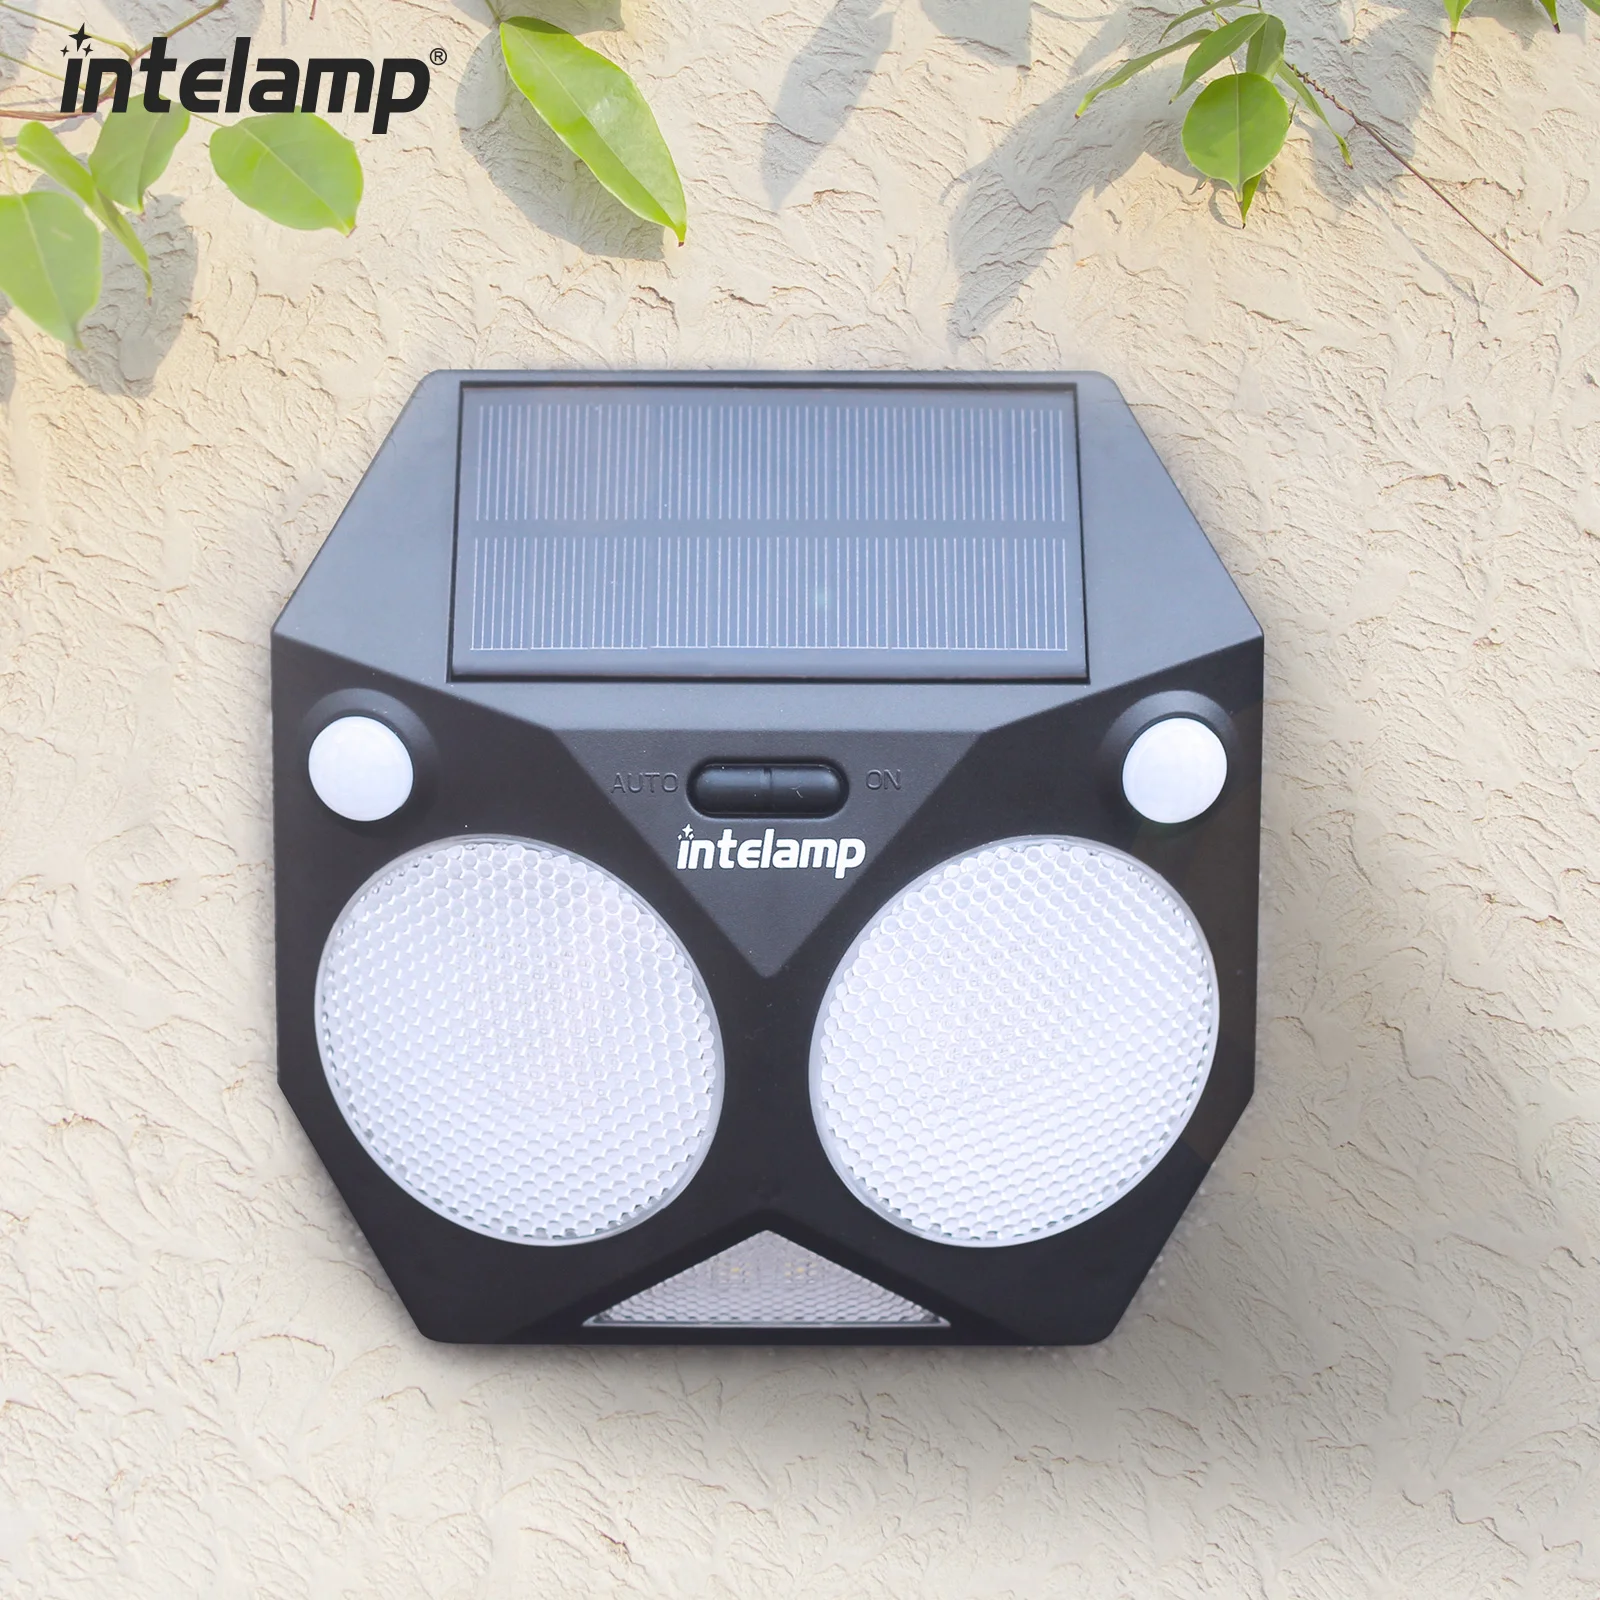 Robot Shape Solar Lights Outdoor with Motion Sensor IP65 Waterproof Super Bright Wall Lamp for Garden Yard Garage Stairs Porch